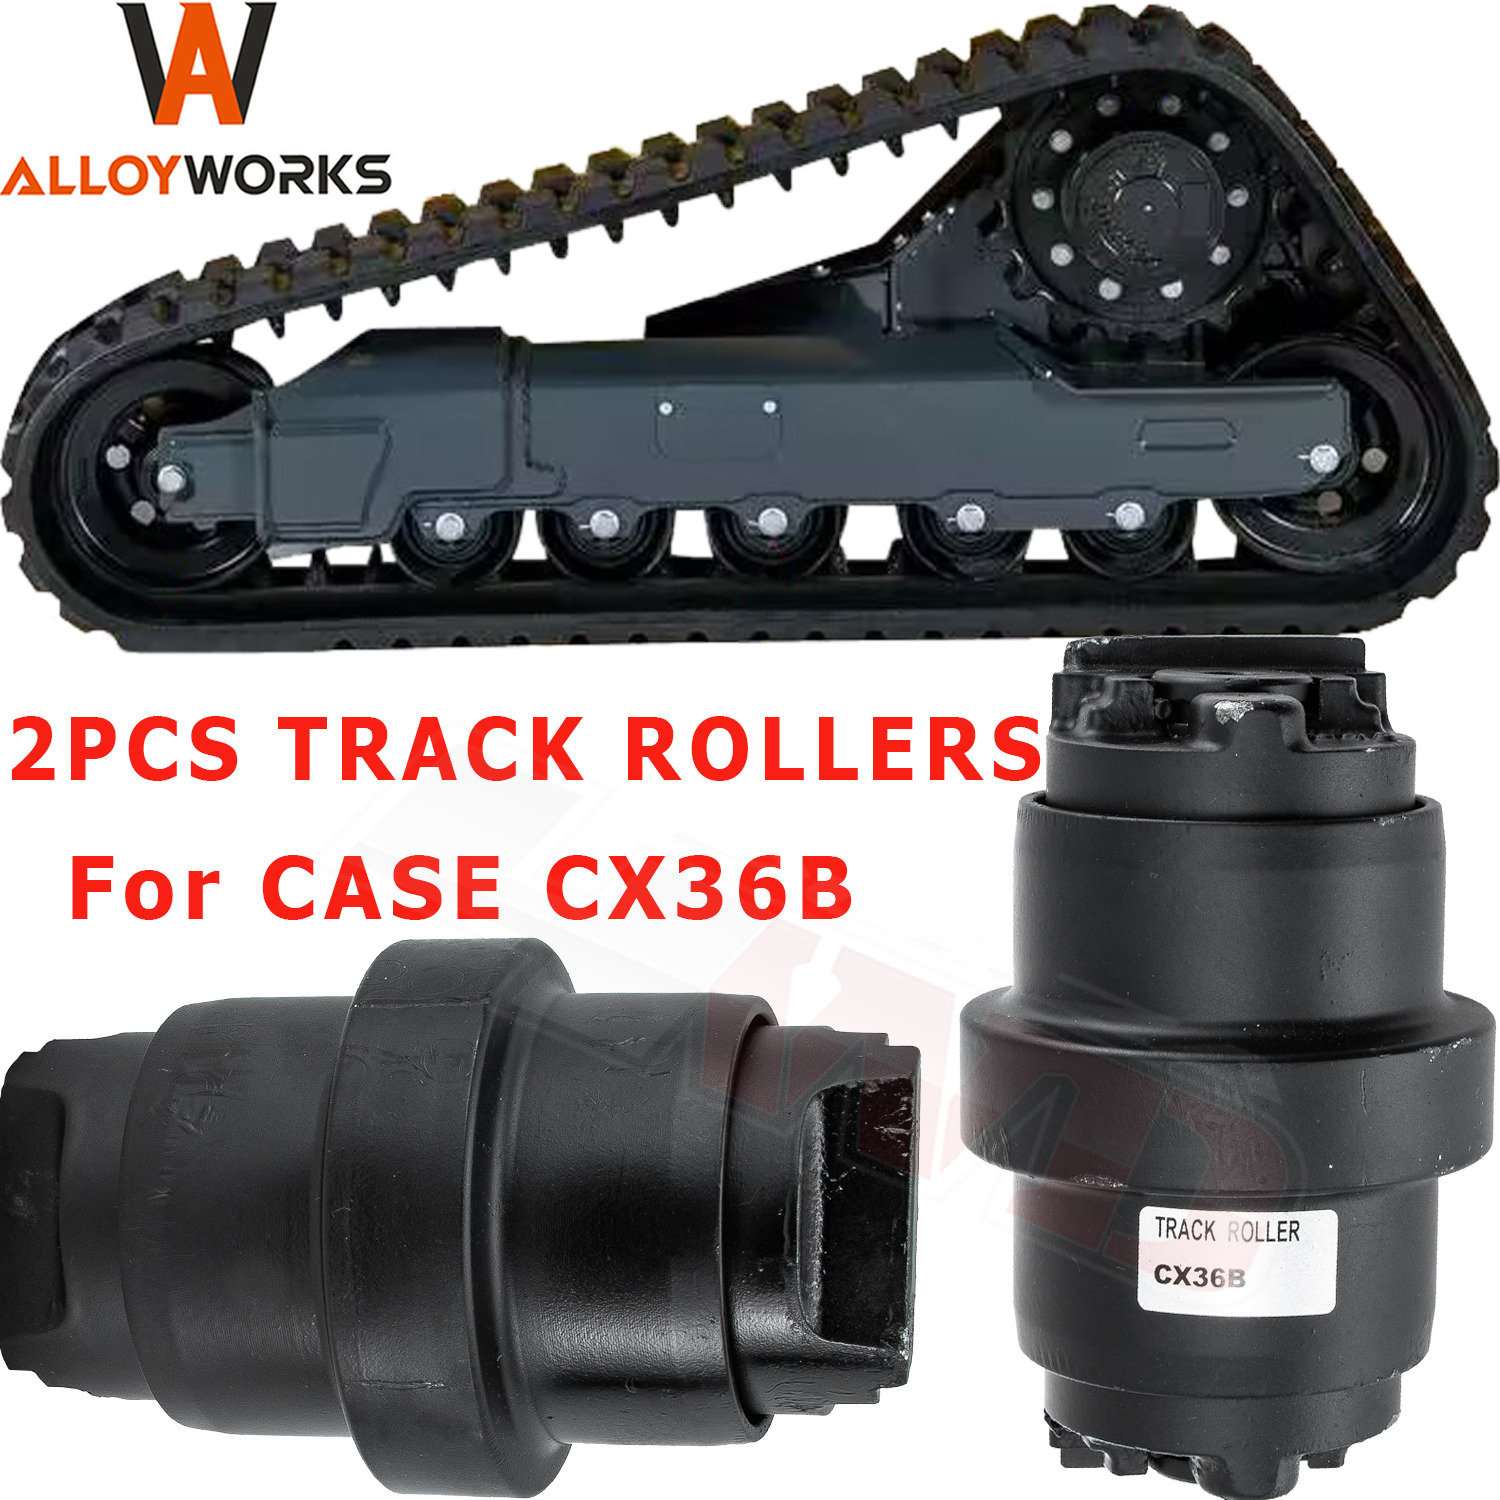 2X Bottom Roller Track Roller For CASE CX36B Heavy Duty Excavator Undercarriage